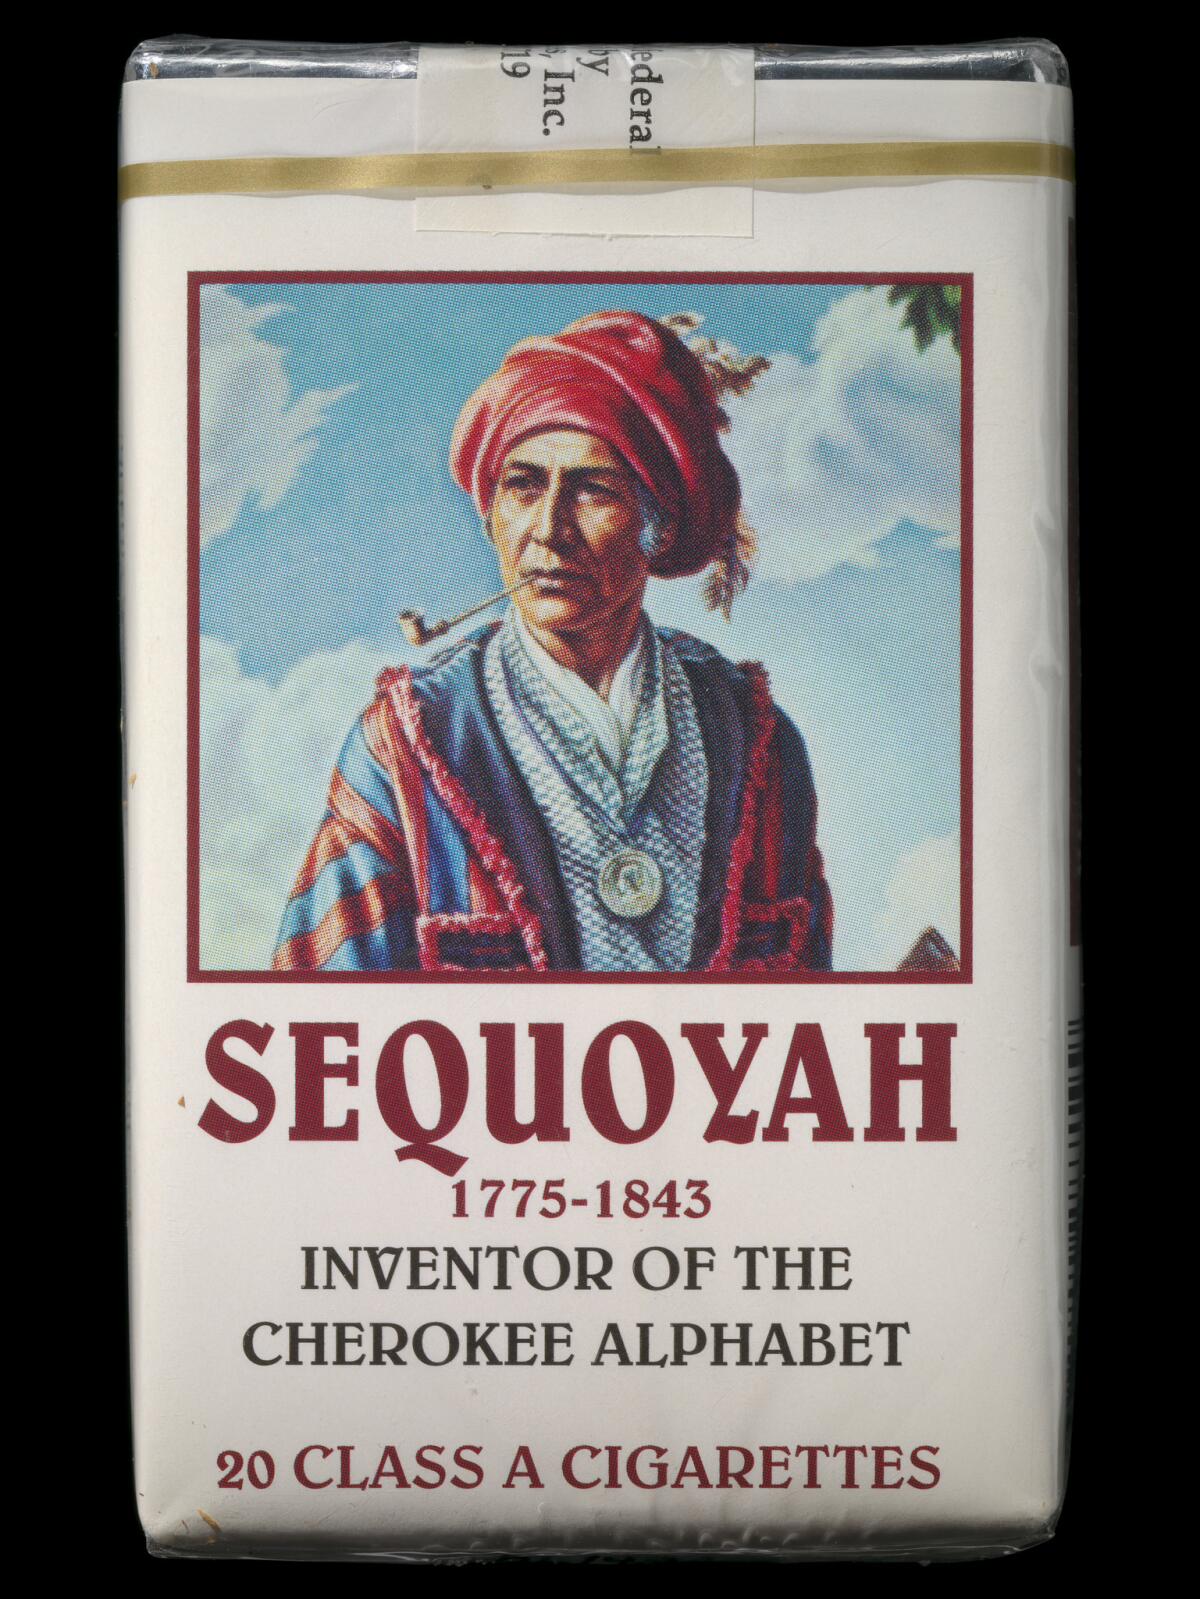 A package of Sequoyah cigarettes from the 1960s — named for the Cherokee leader.